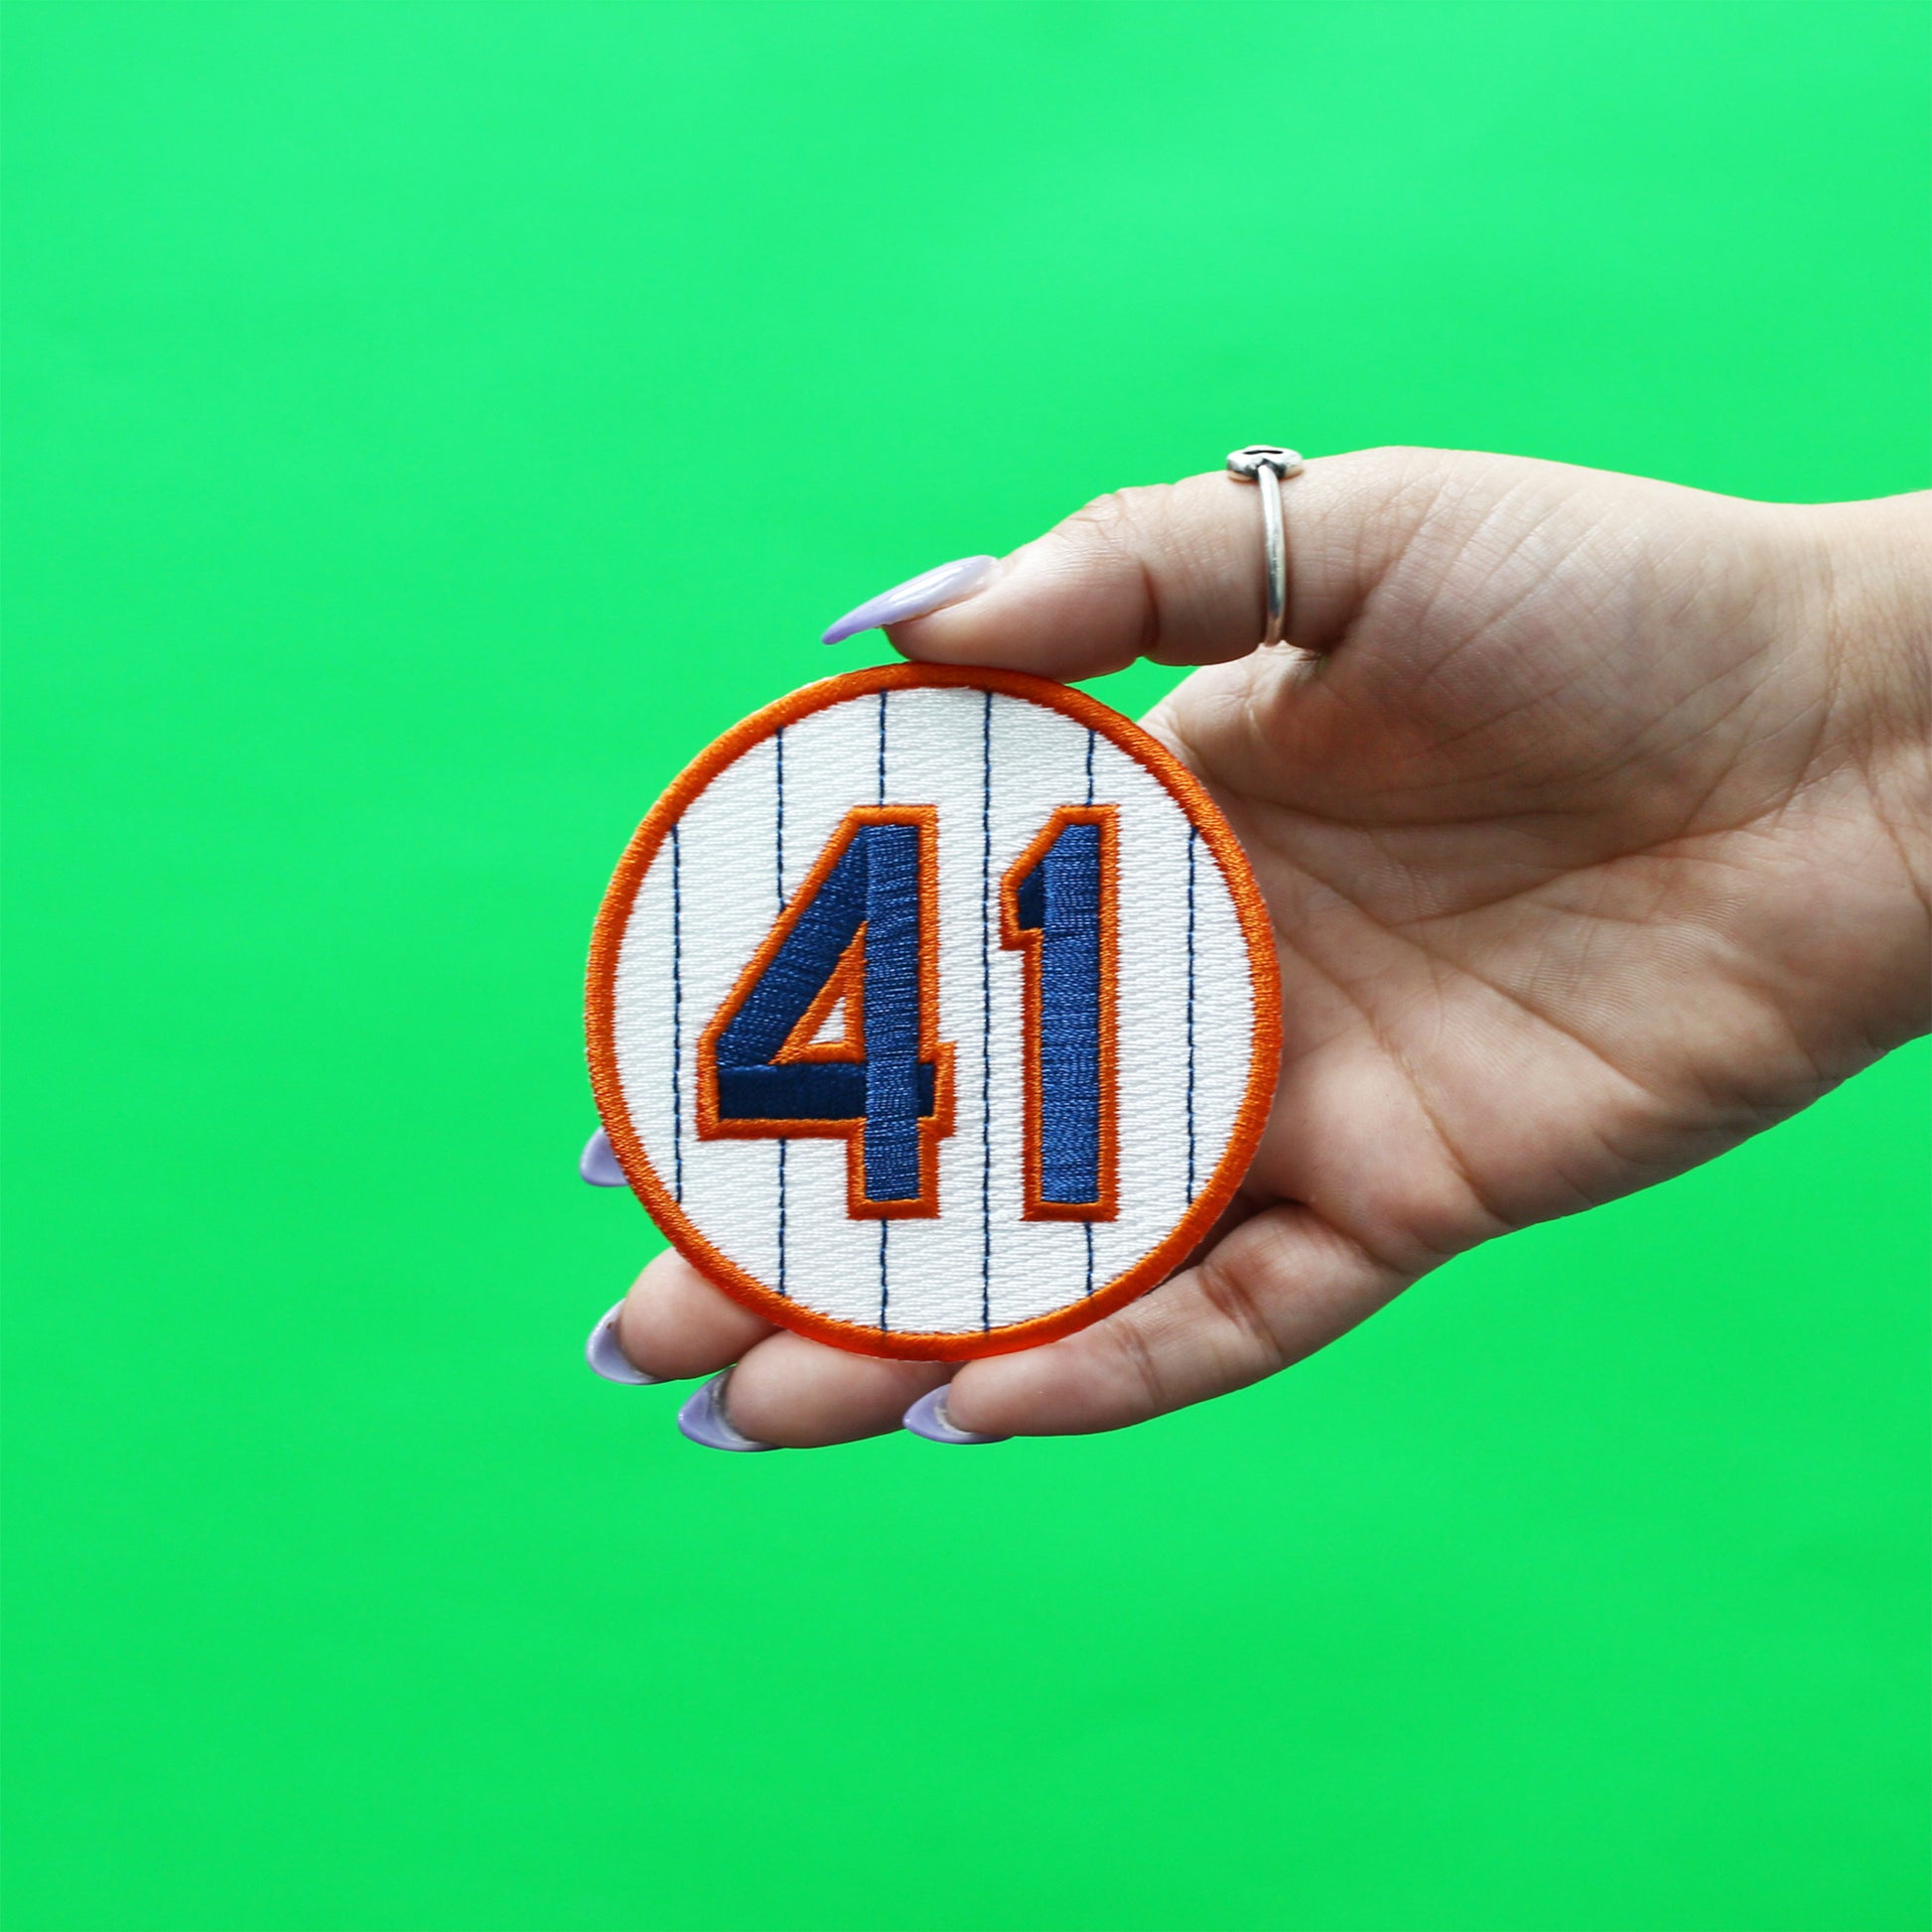 Mets to Honor Tom Seaver with 41 Patch on Sleeves for 2021